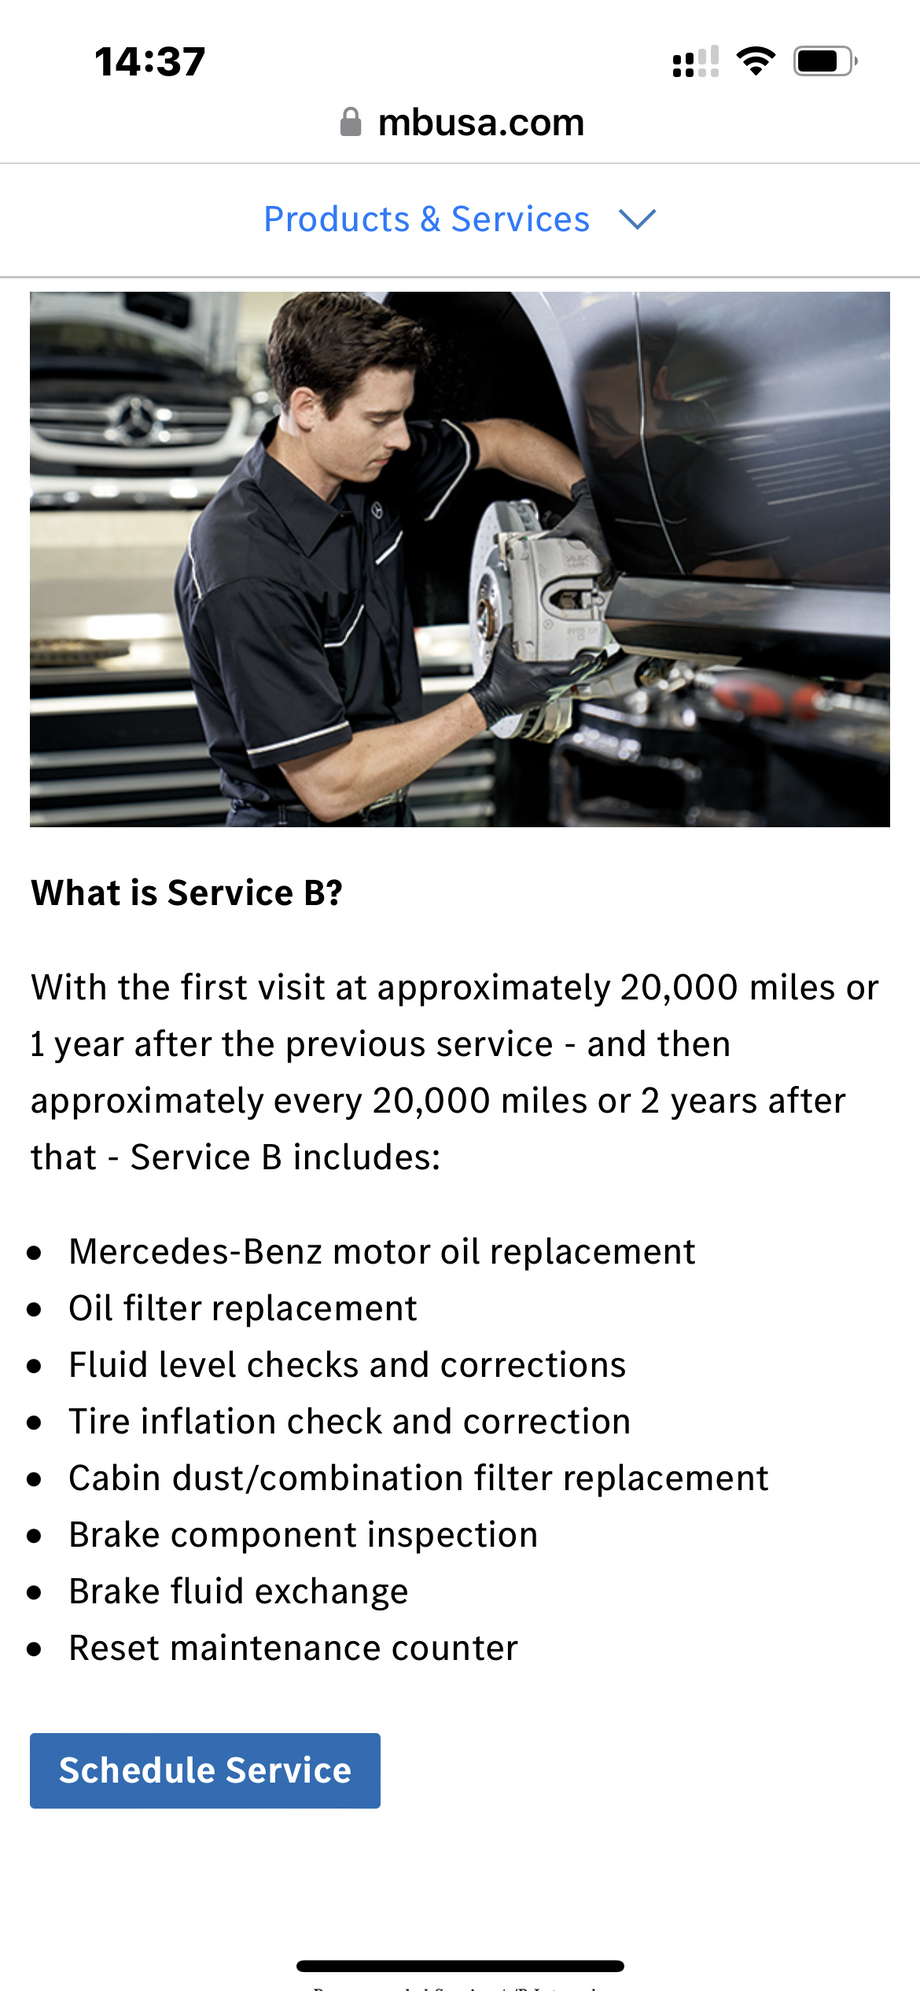 Mercedes Benz Service A and B Explained